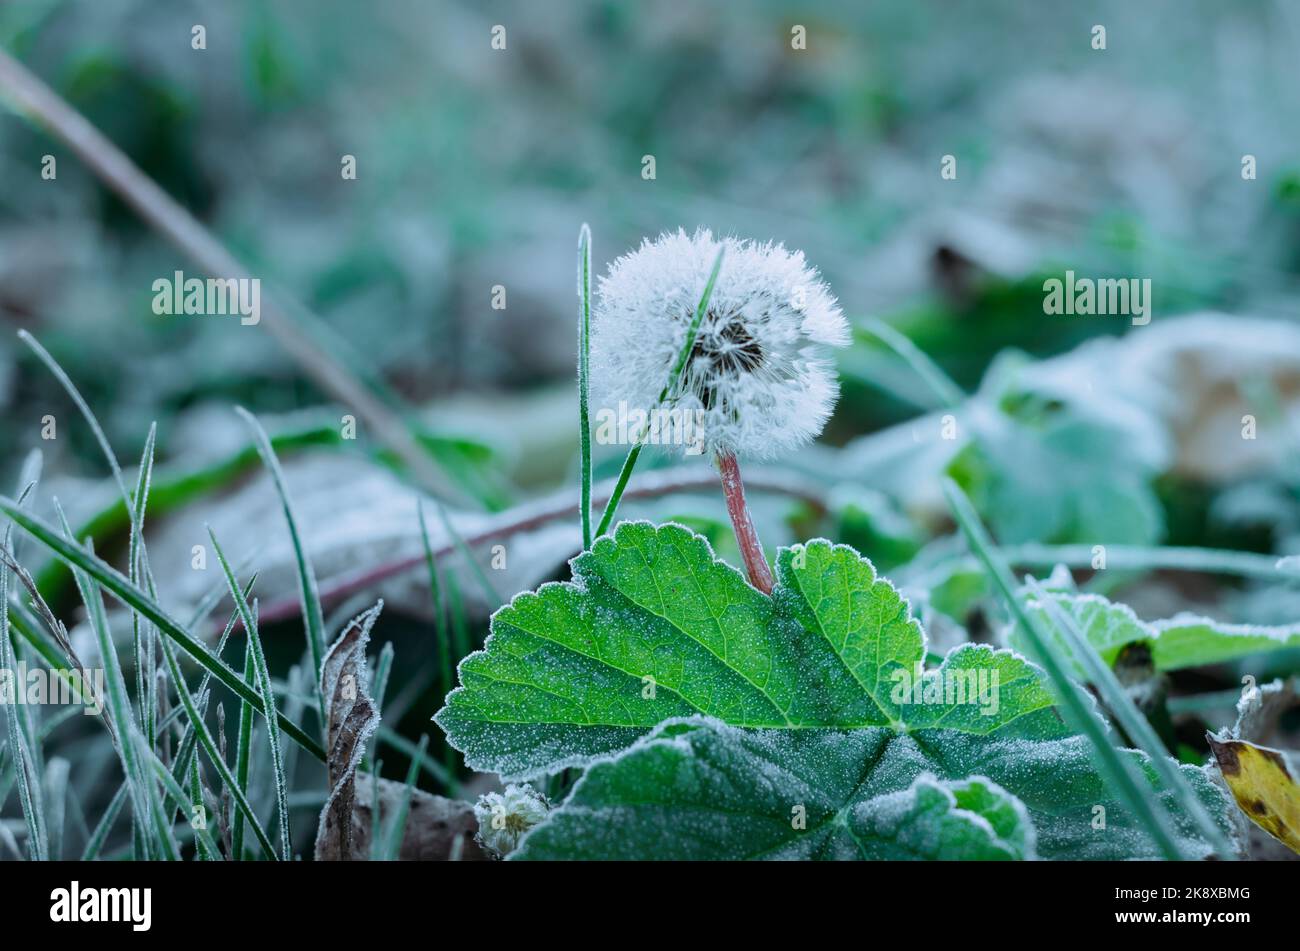 Dandelion fluff and grass covered by morning autumn hoar frost close up Stock Photo